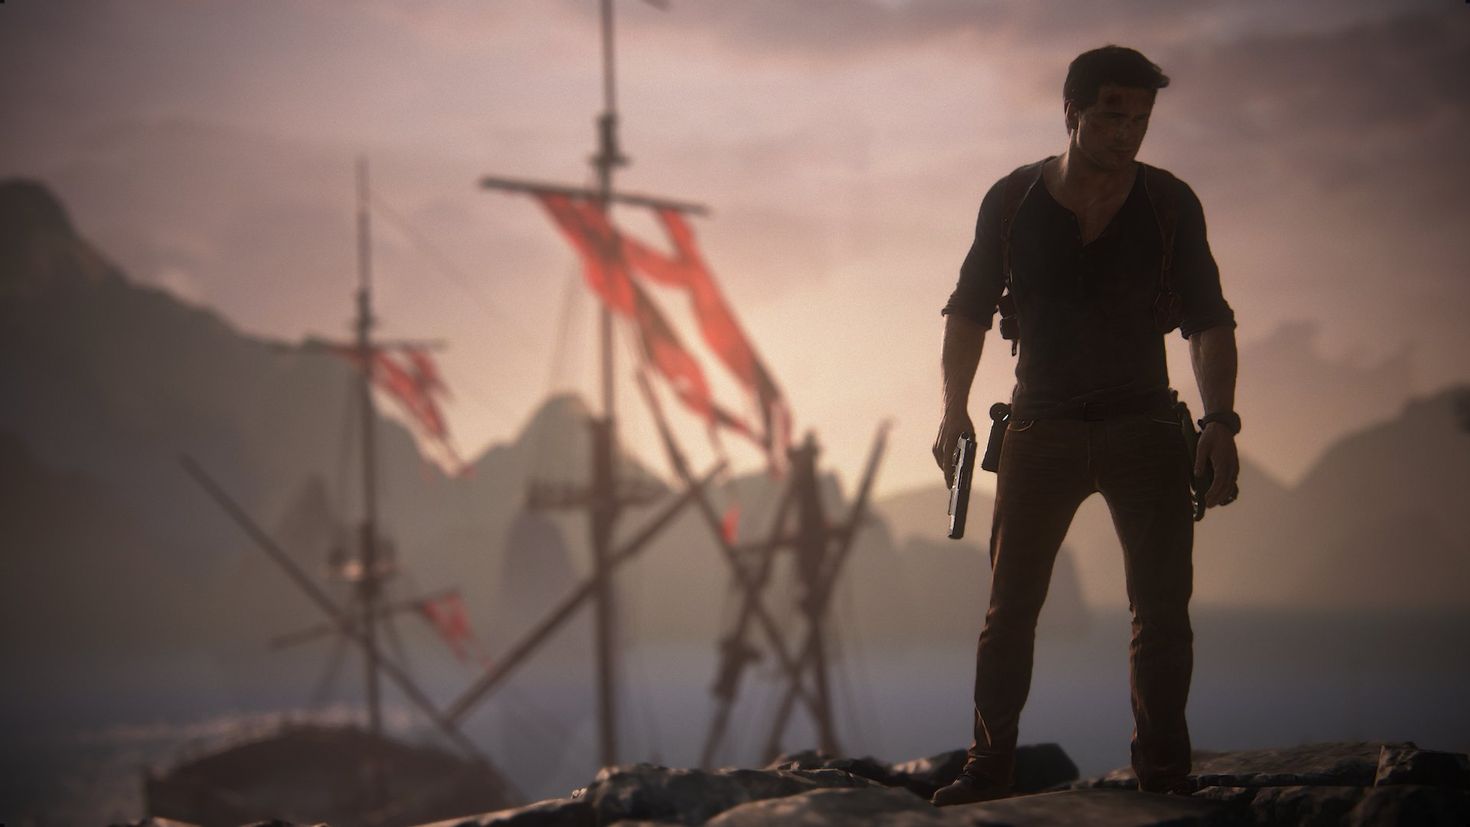 Неизведанные 4. Анчартед 4. Uncharted 4 a Thief s end. Nathan Drake Uncharted 4 Wallpapers. Путь вора 4.